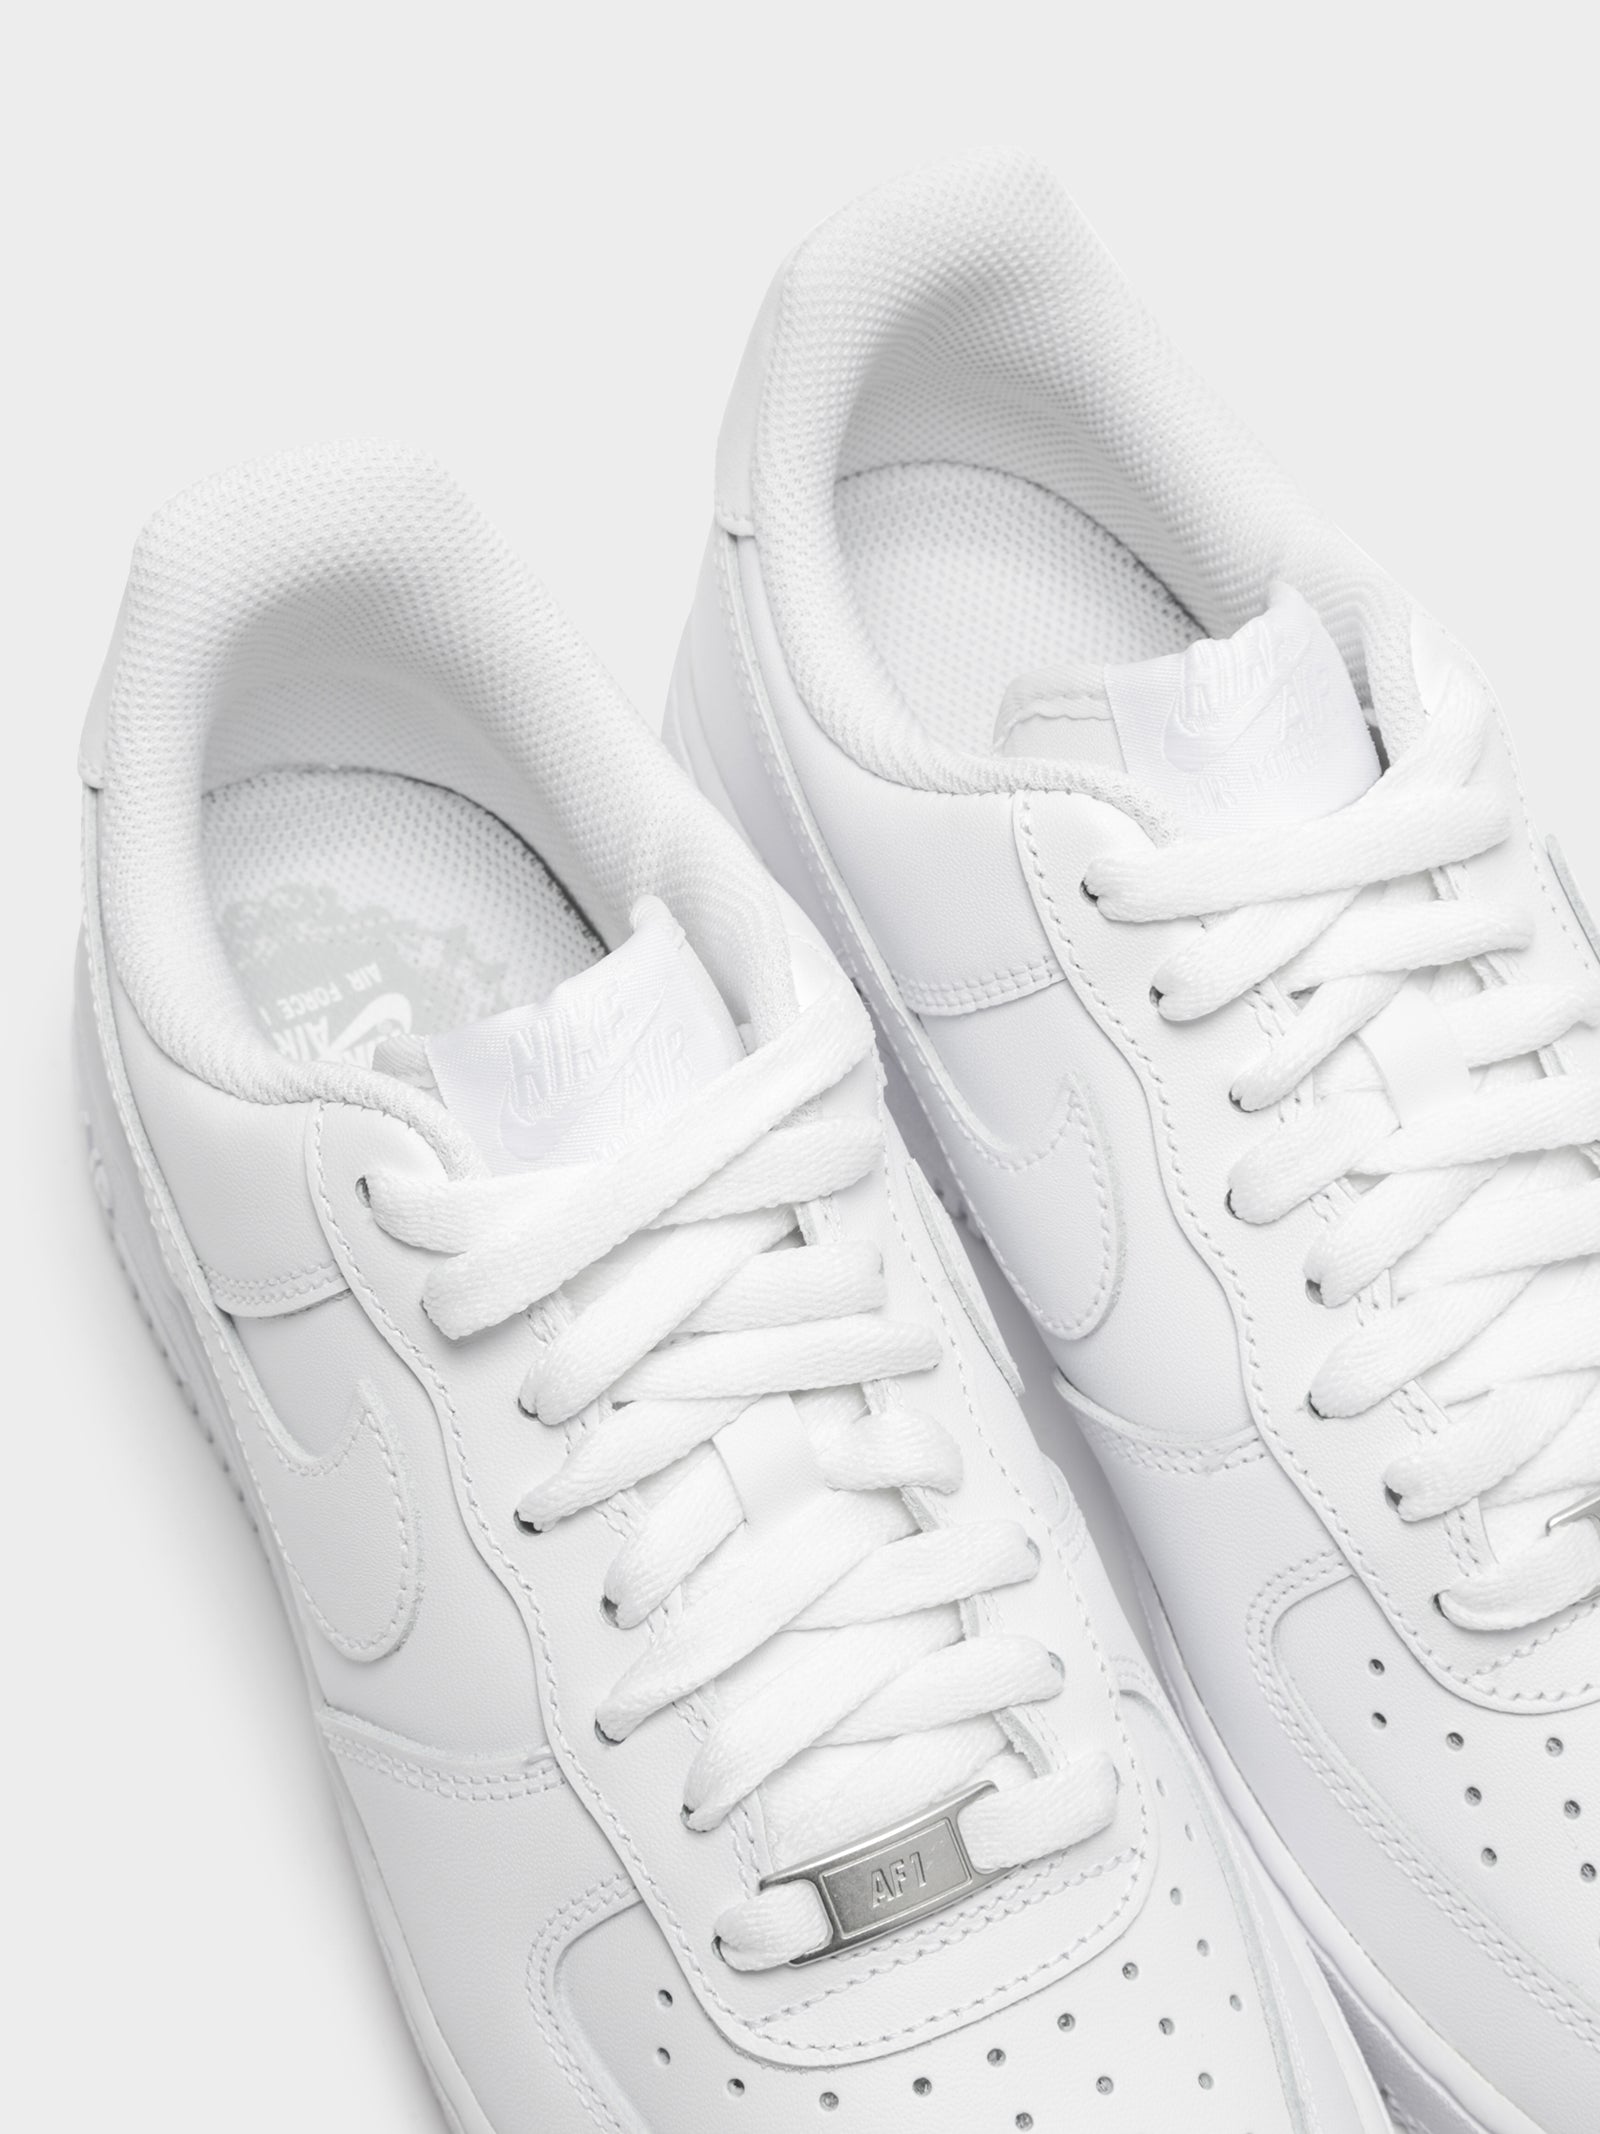 Womens Air Force 1 '07 in White